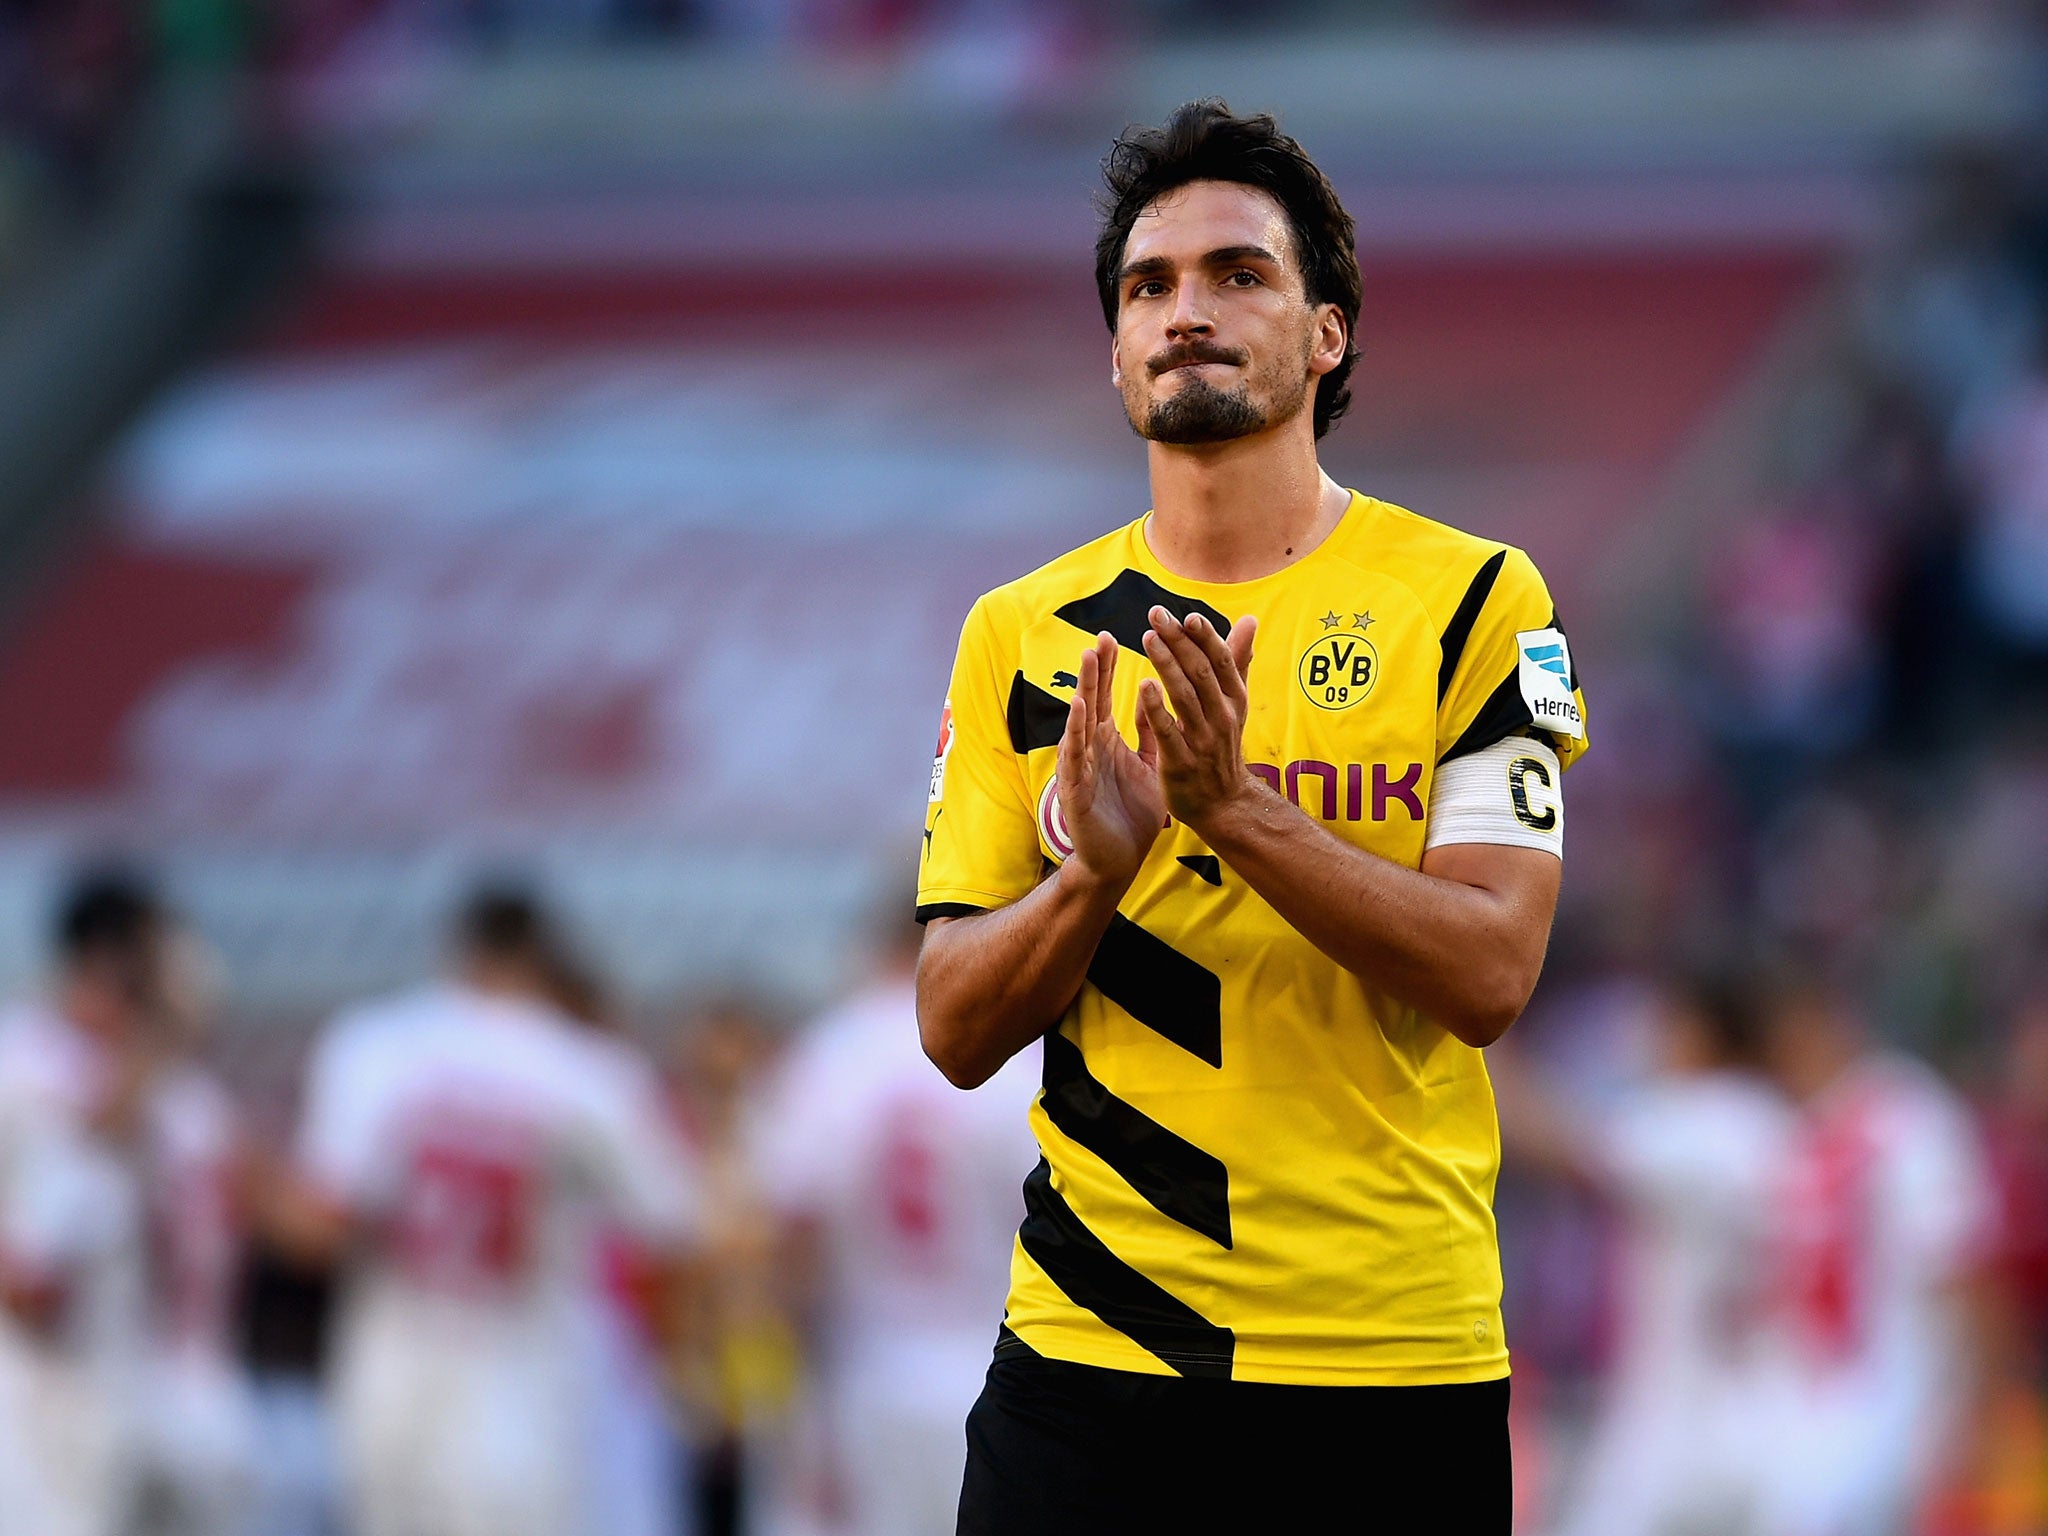 Borussia Dortmund defender Mats Hummels could finally be on his way to Manchester United